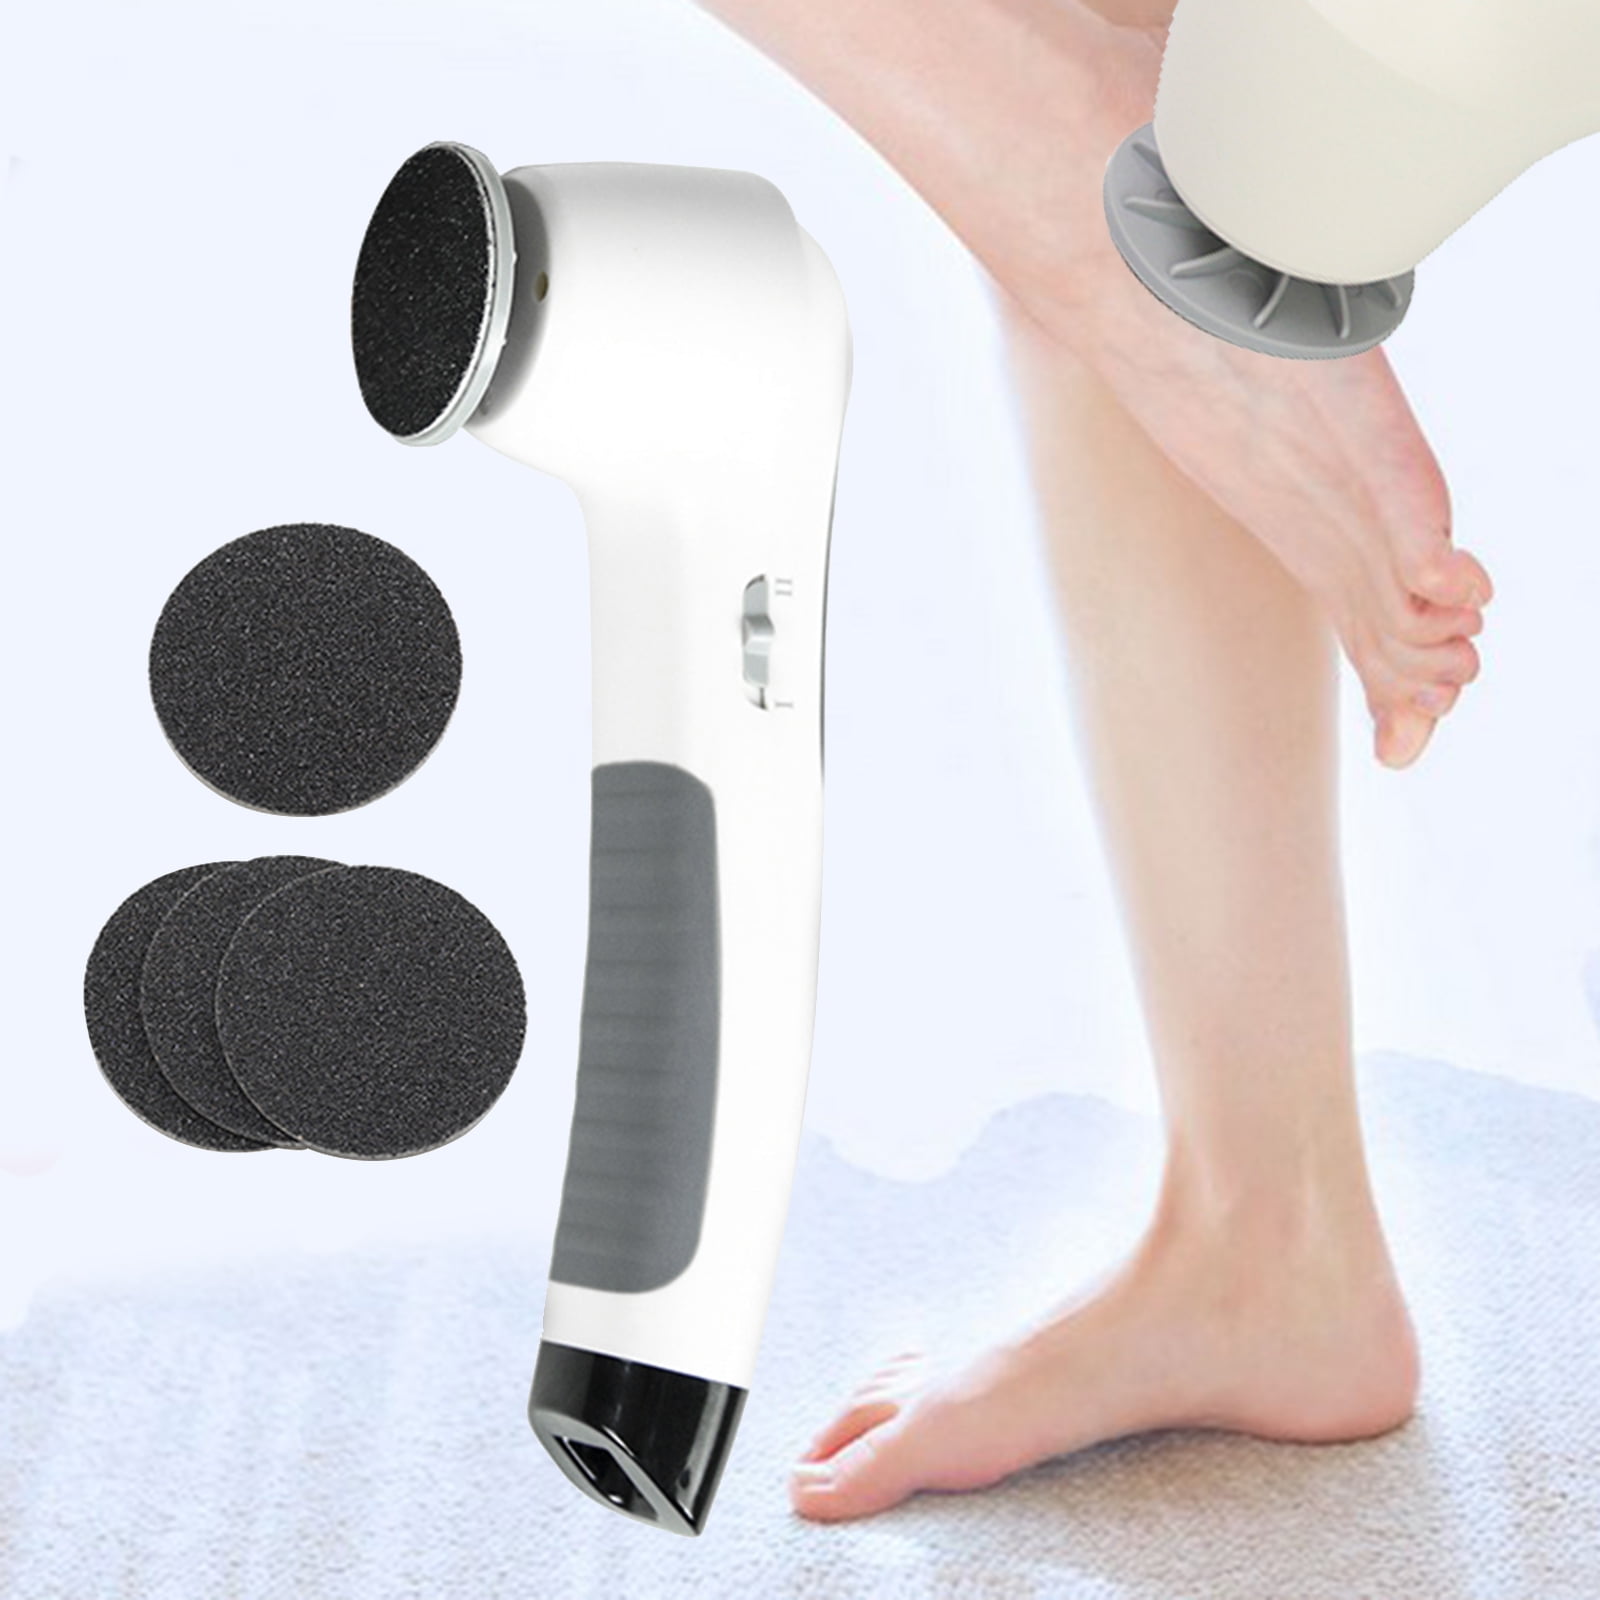 FELINE - Electric Foot Callus Remover: Say Goodbye to Cracked Heels